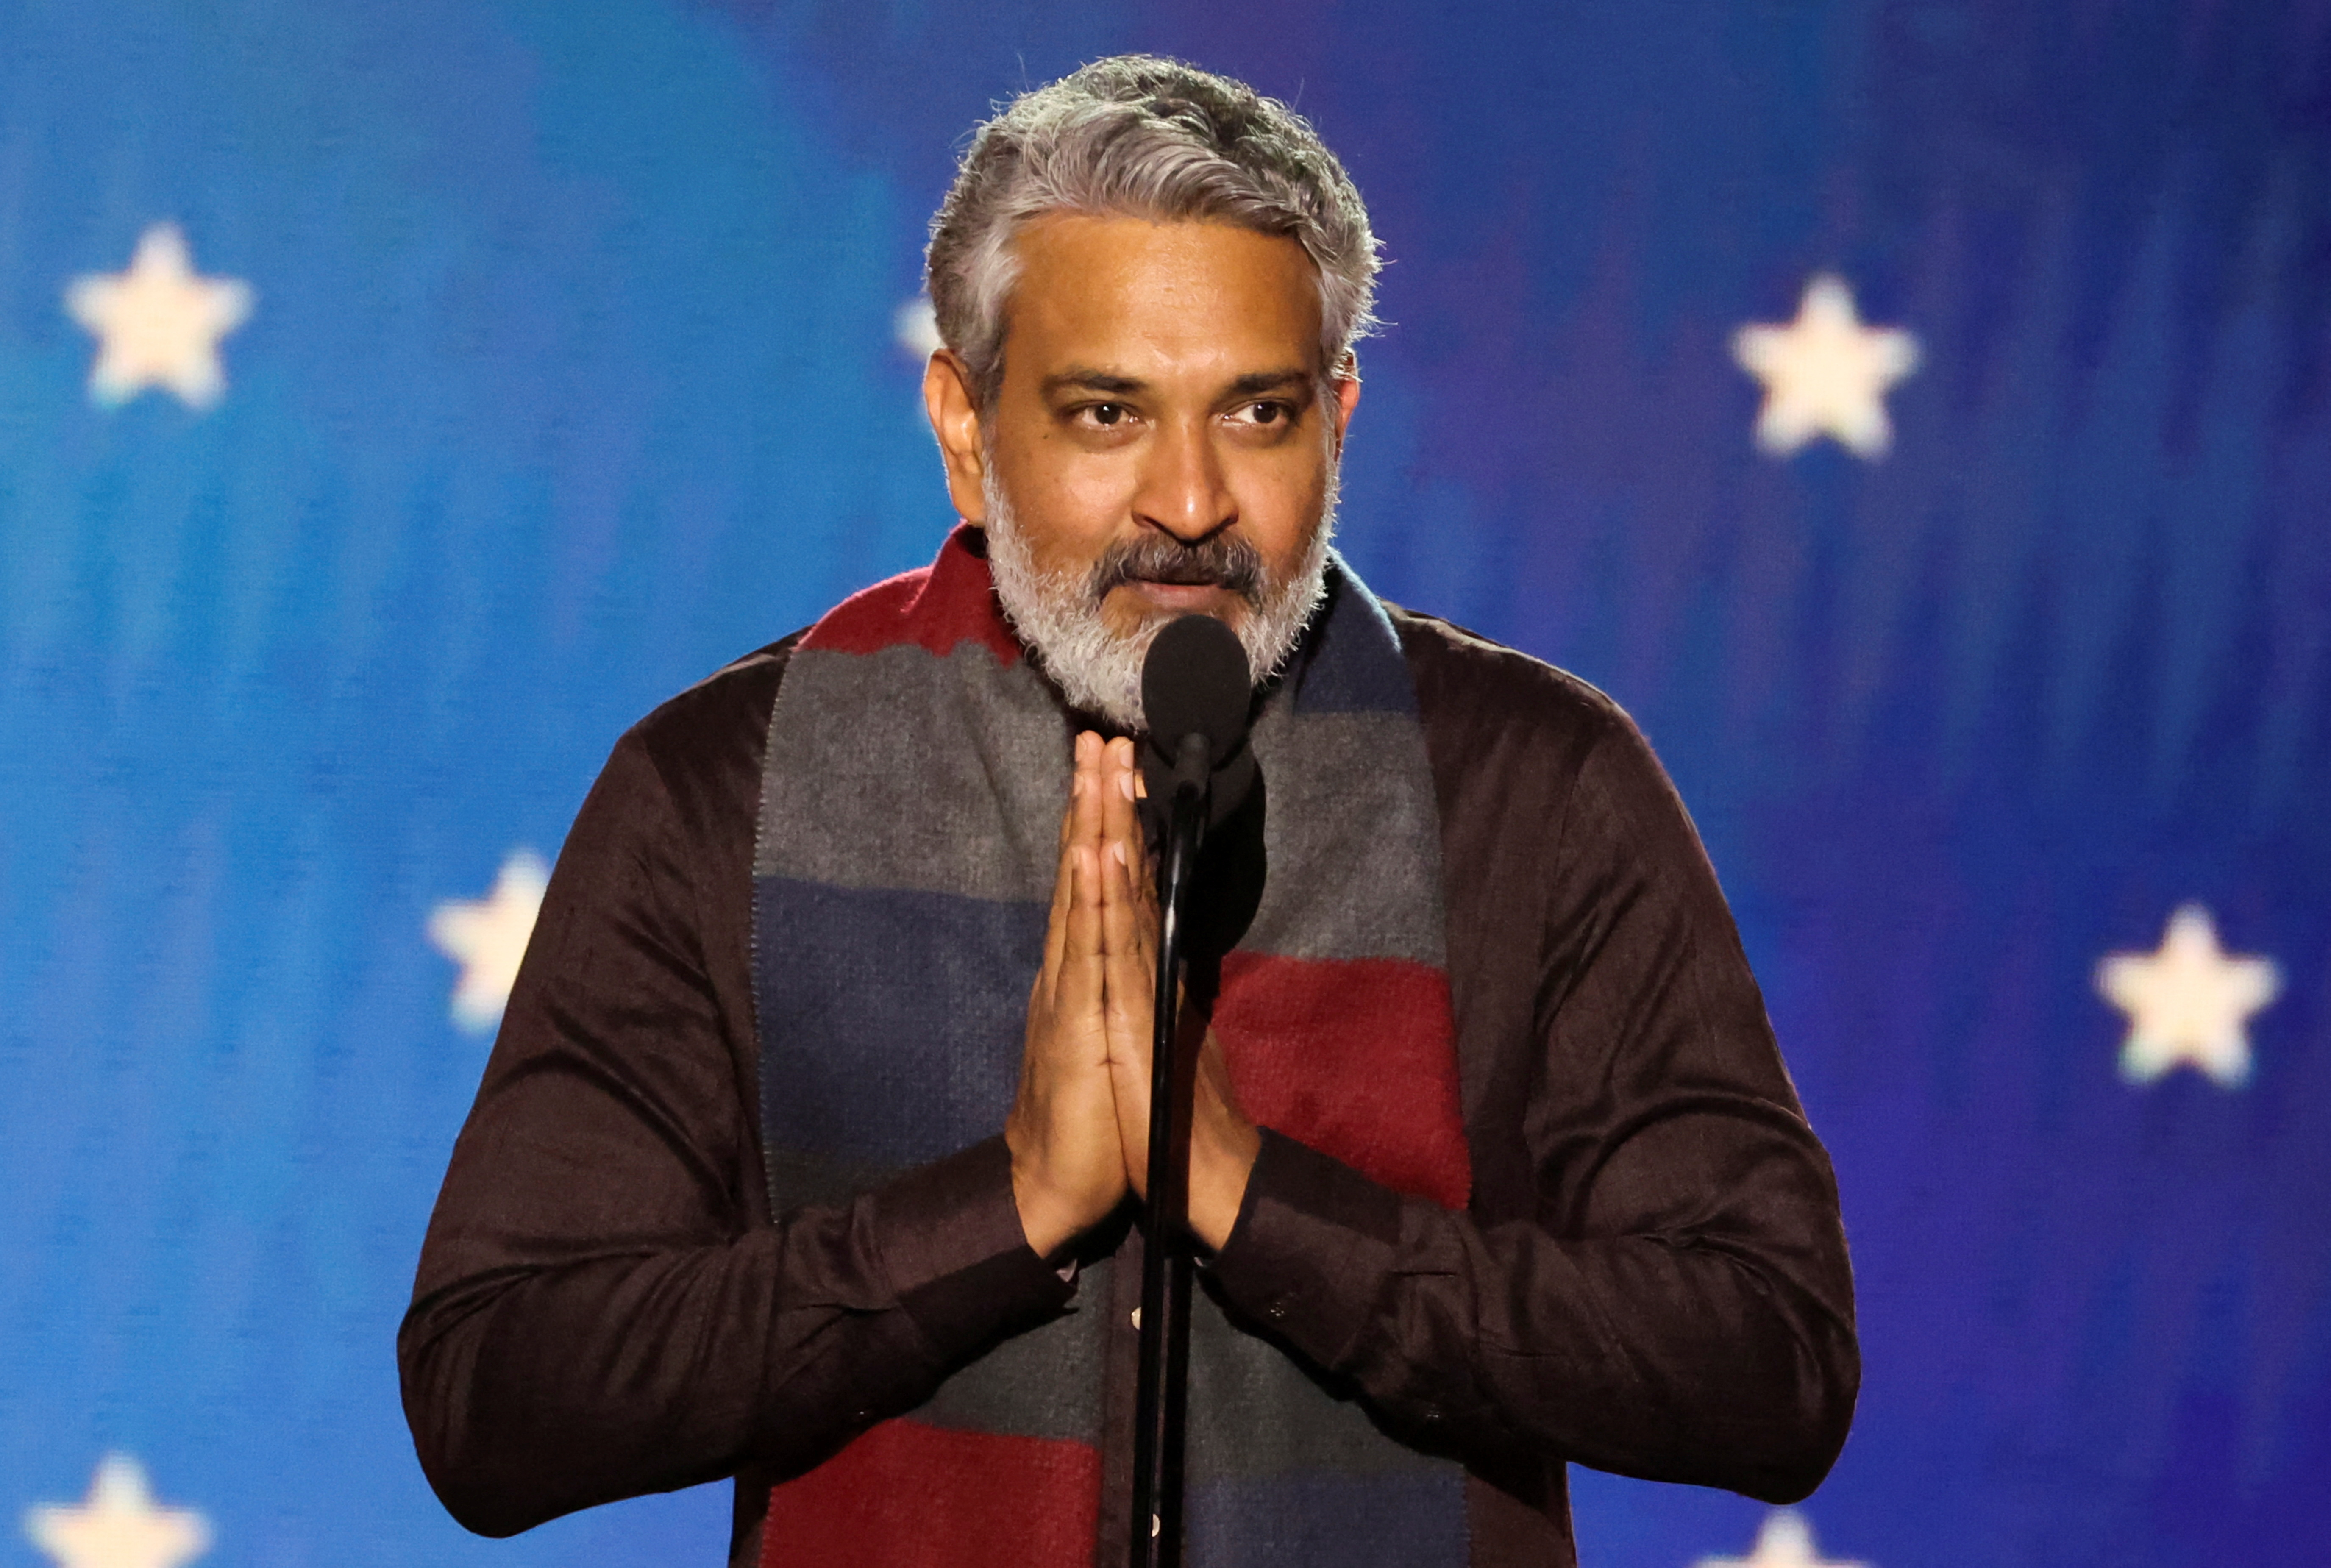 S. S. Rajamouli accepts the Best Foreign Language Film award for "RRR" during the 28th annual Critics Choice Awards in Los Angeles, California, U.S., January 15, 2023. REUTERS/Mario Anzuoni